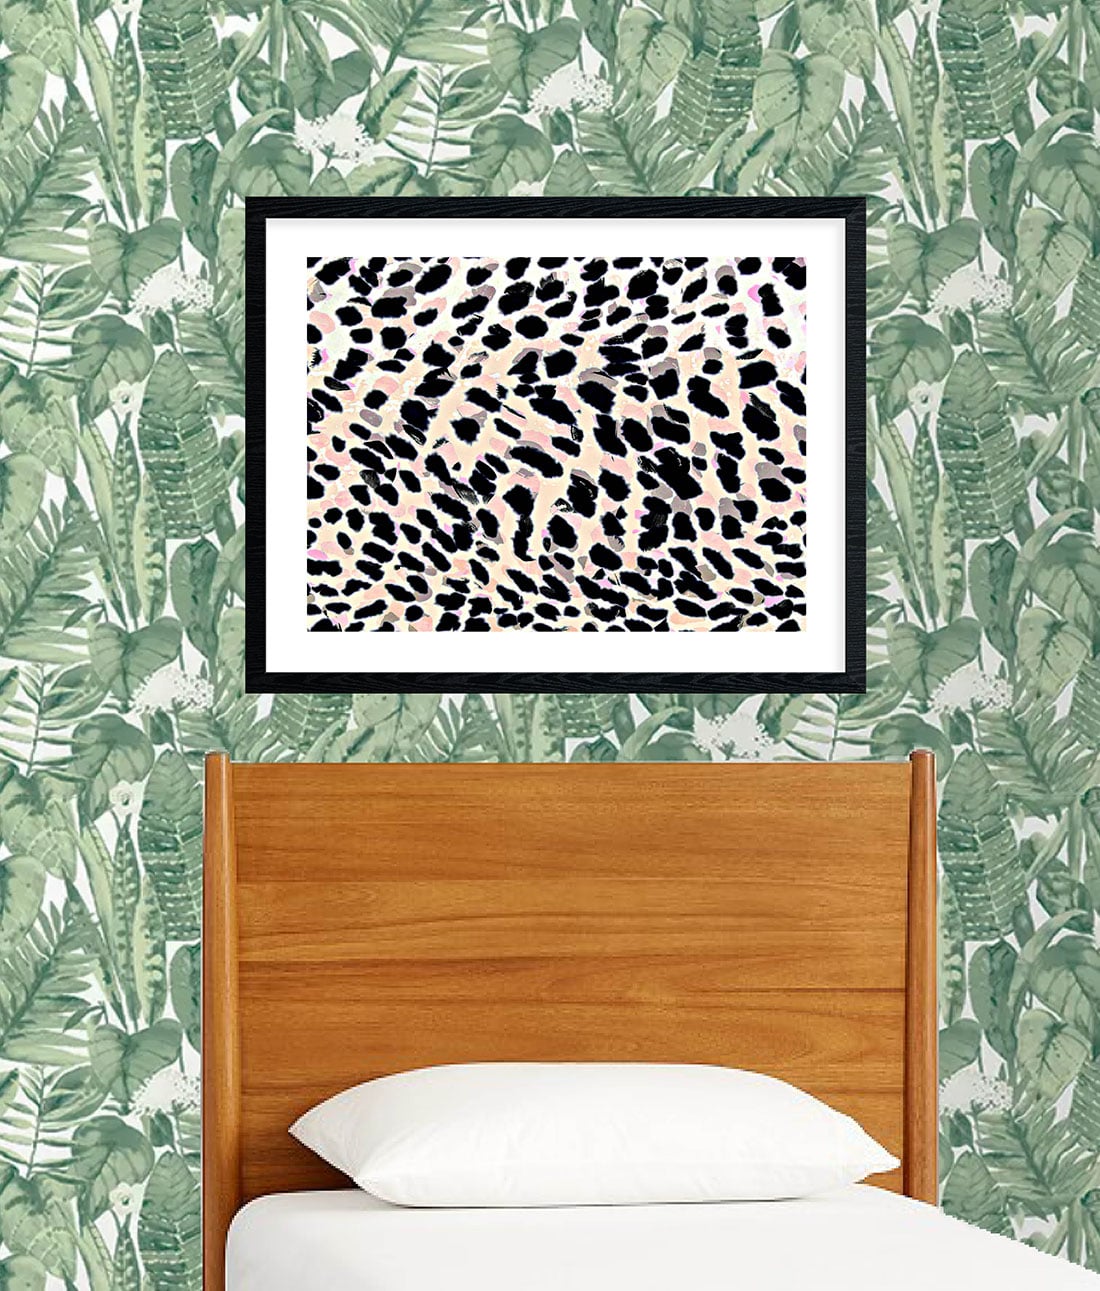 Safari Gallery Wall Ideas for Kids of All Ages • Little Gold Pixel • In which I curate a few safari gallery wall ideas for kids — ones that will grow with them from nursery to big kid status. Part of the Frame Game series. • #safari #gallerywall #gallerywallideas #kidsroom #wallart #freeprintables